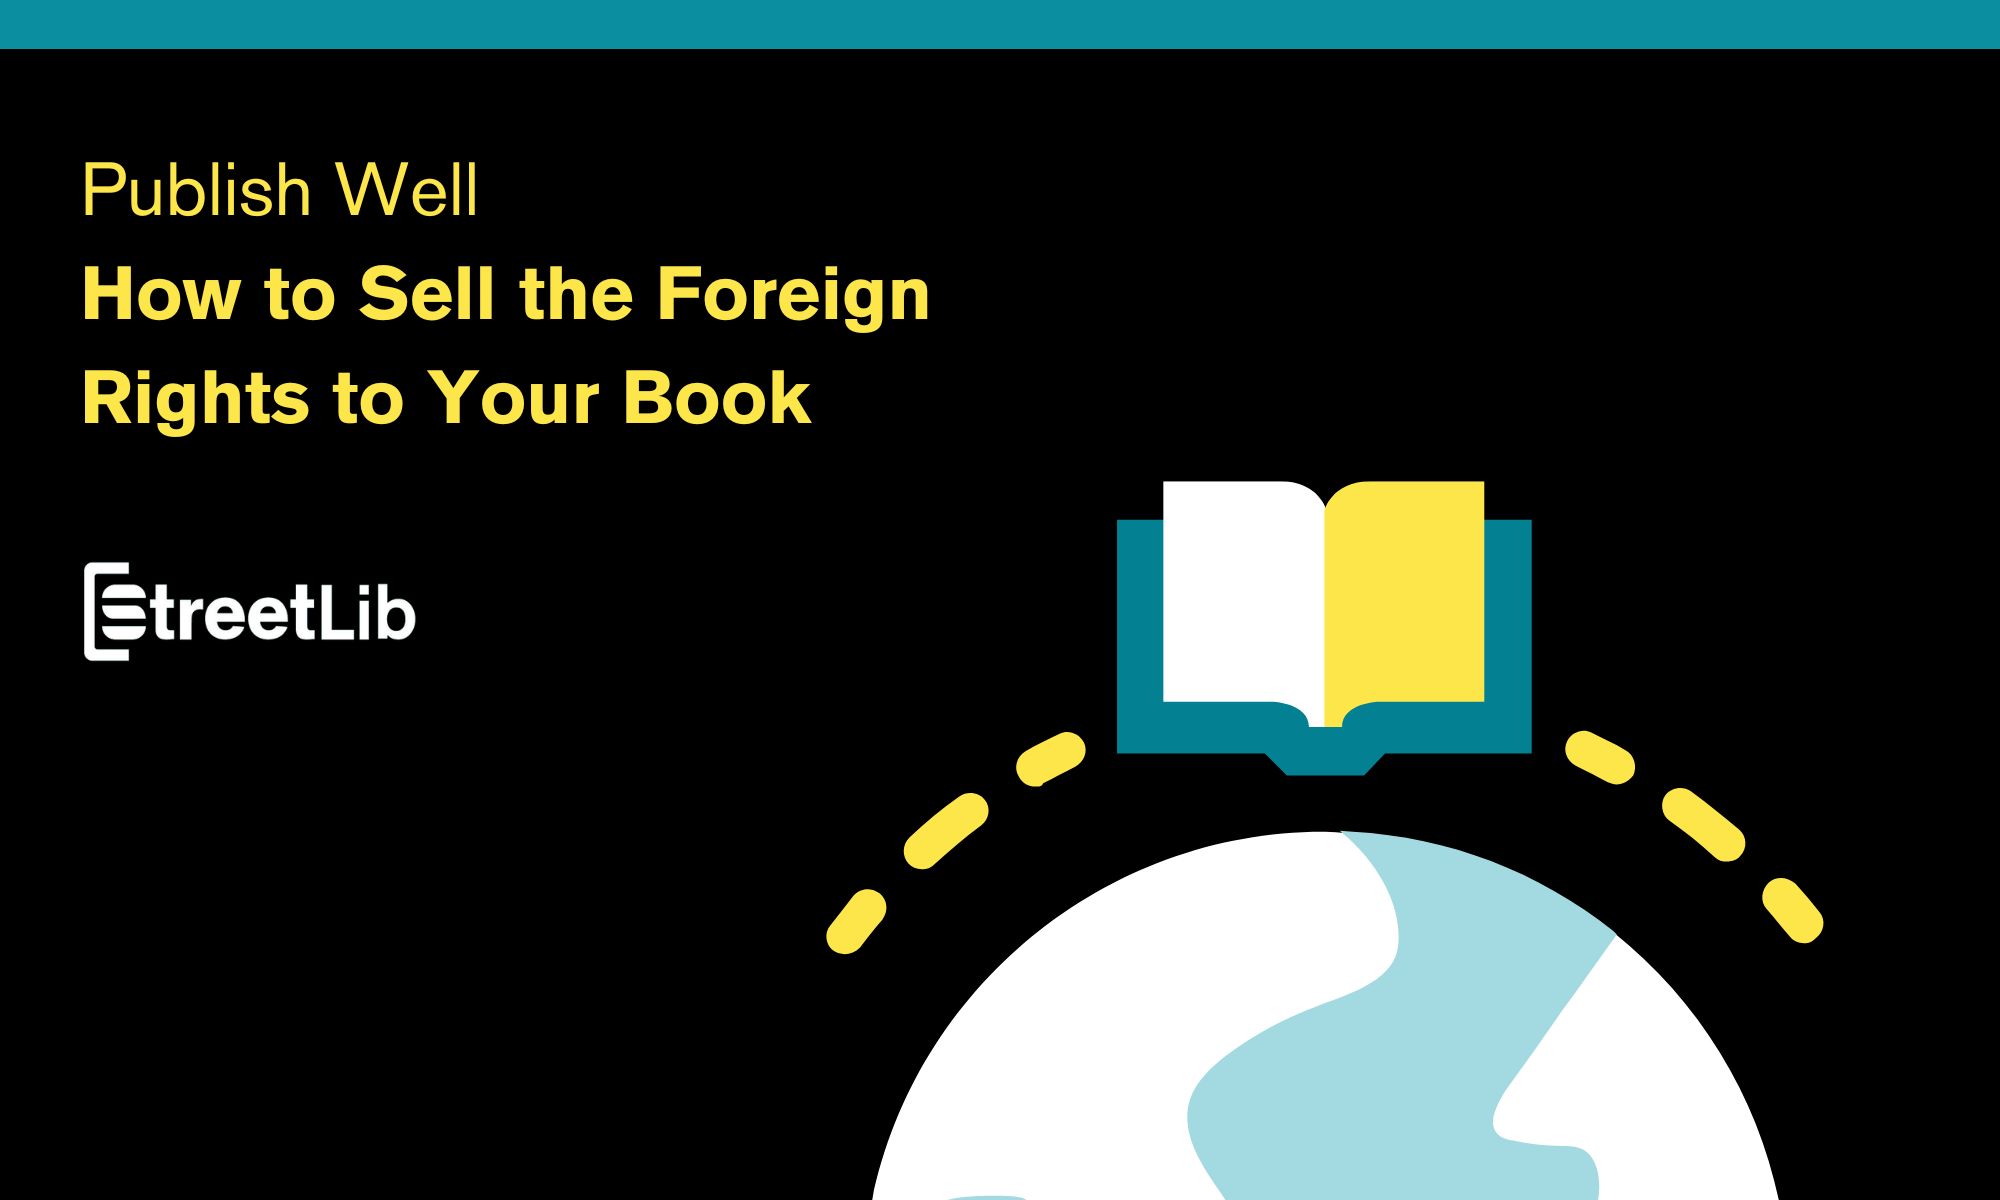 How to Sell Foreign Rights to Your Book